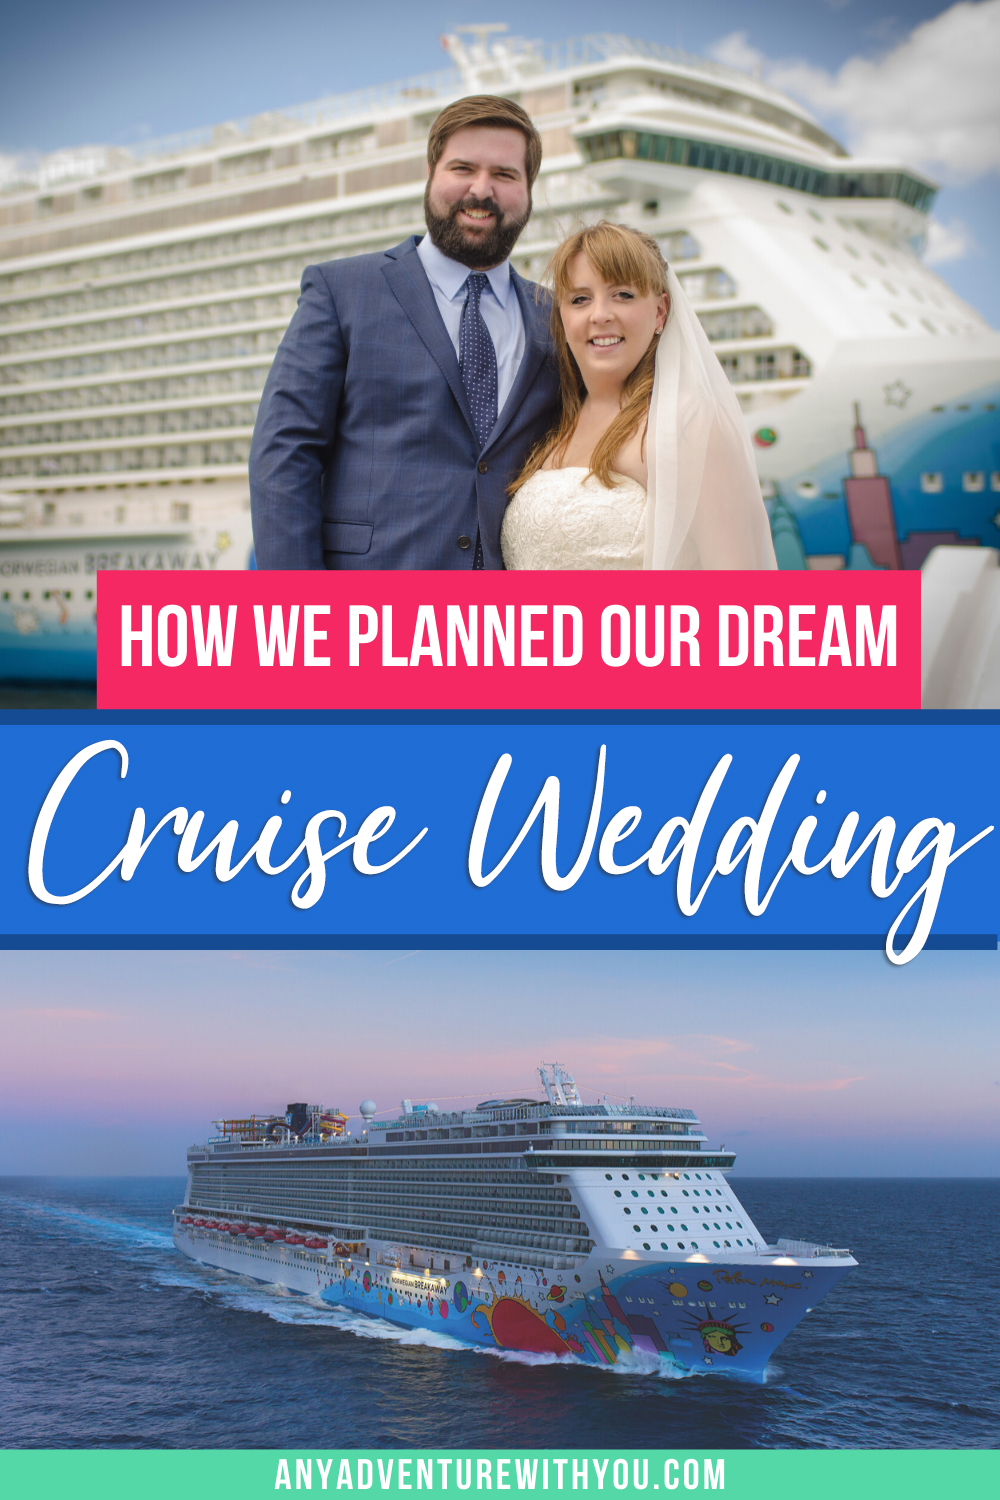 Before we had our cruise ship wedding, we had a year’s worth of planning, ranging from coordinating ceremony locations to transportation to organizing 40 people. Here’s how we did it all. #DestinationWedding #CruiseWedding #CruiseMarriage #DestinationWeddingPlanning #DestinationWeddingTips #WeddingPlanning #WeddingTips